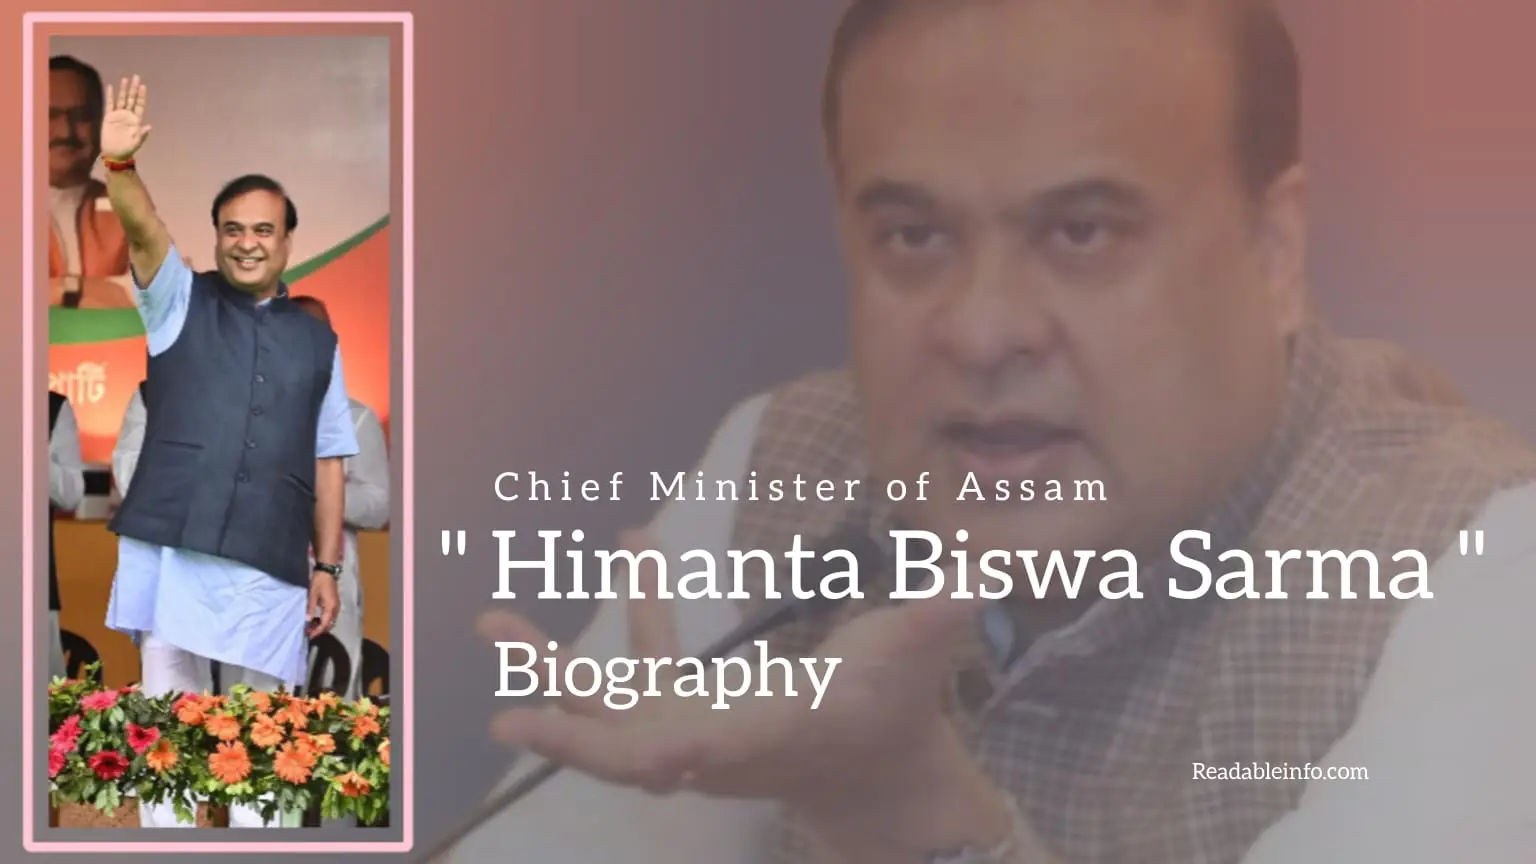 You are currently viewing Himanta Biswa Sarma Biography (Chief Minister of Assam)